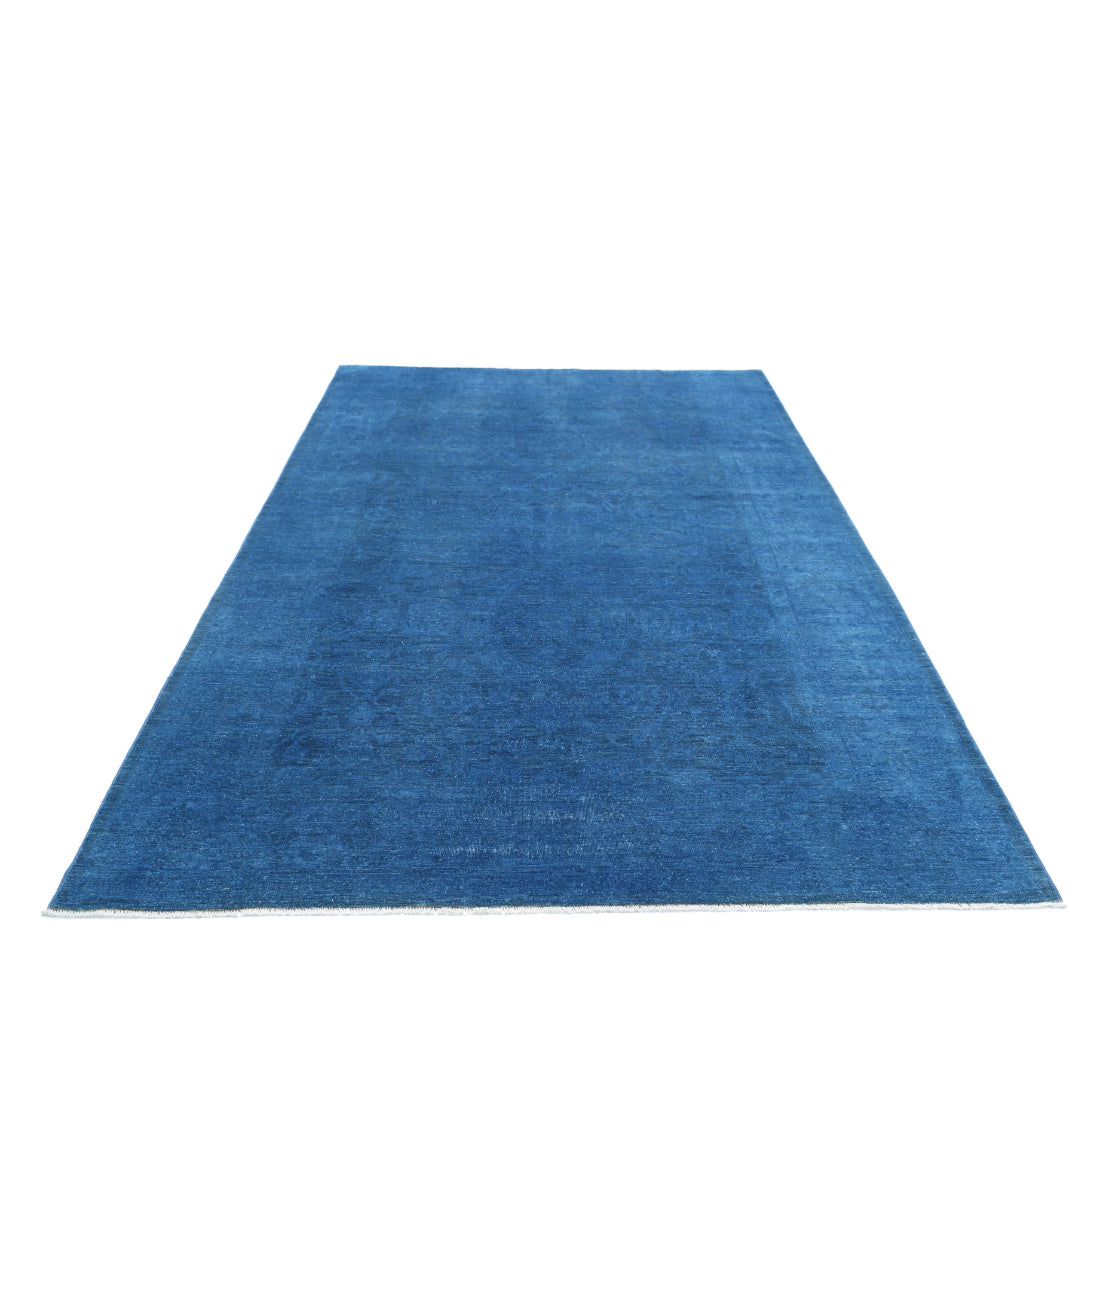 Hand Knotted Overdye Wool Rug - 5'11'' x 9'9'' 5'11'' x 9'9'' (178 X 293) / Blue / Blue